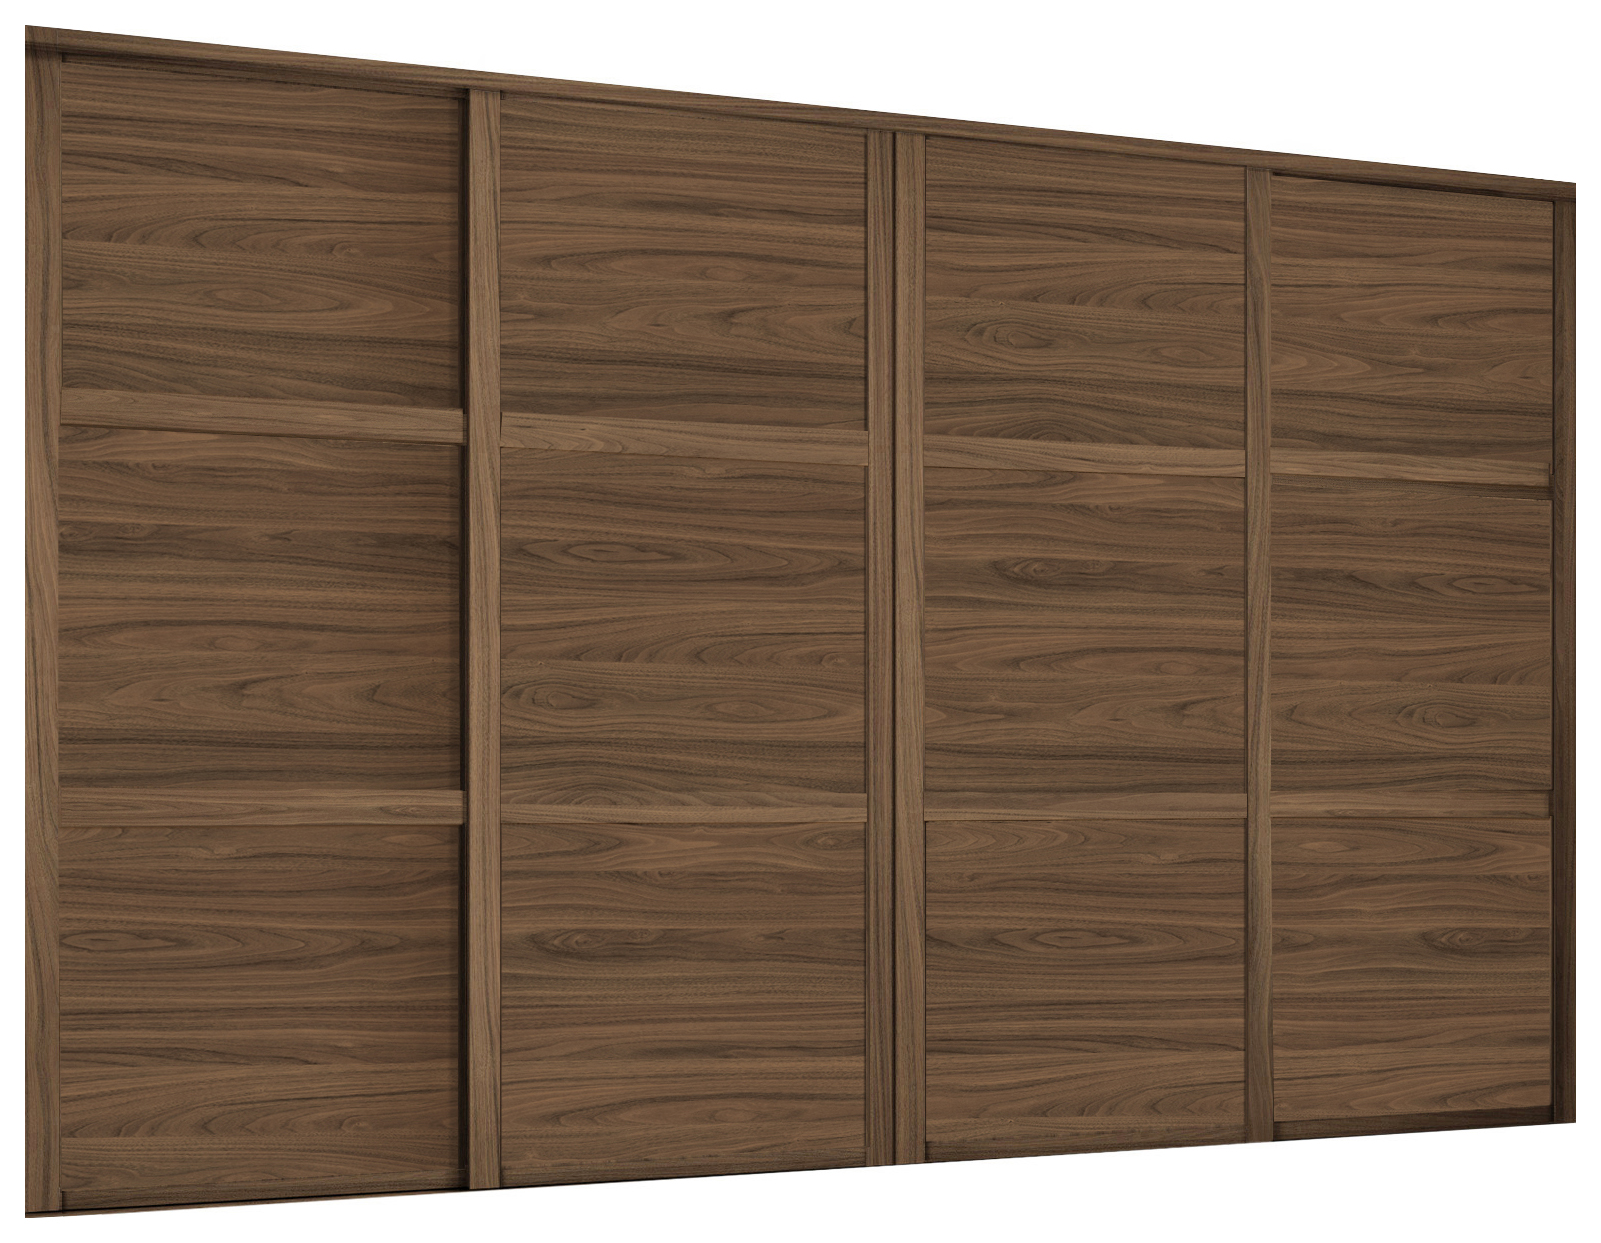 Image of Spacepro Shaker Carini Walnut Frame 3 Panel Sliding Door Kit with Colour Matched Track - 4 x 914mm